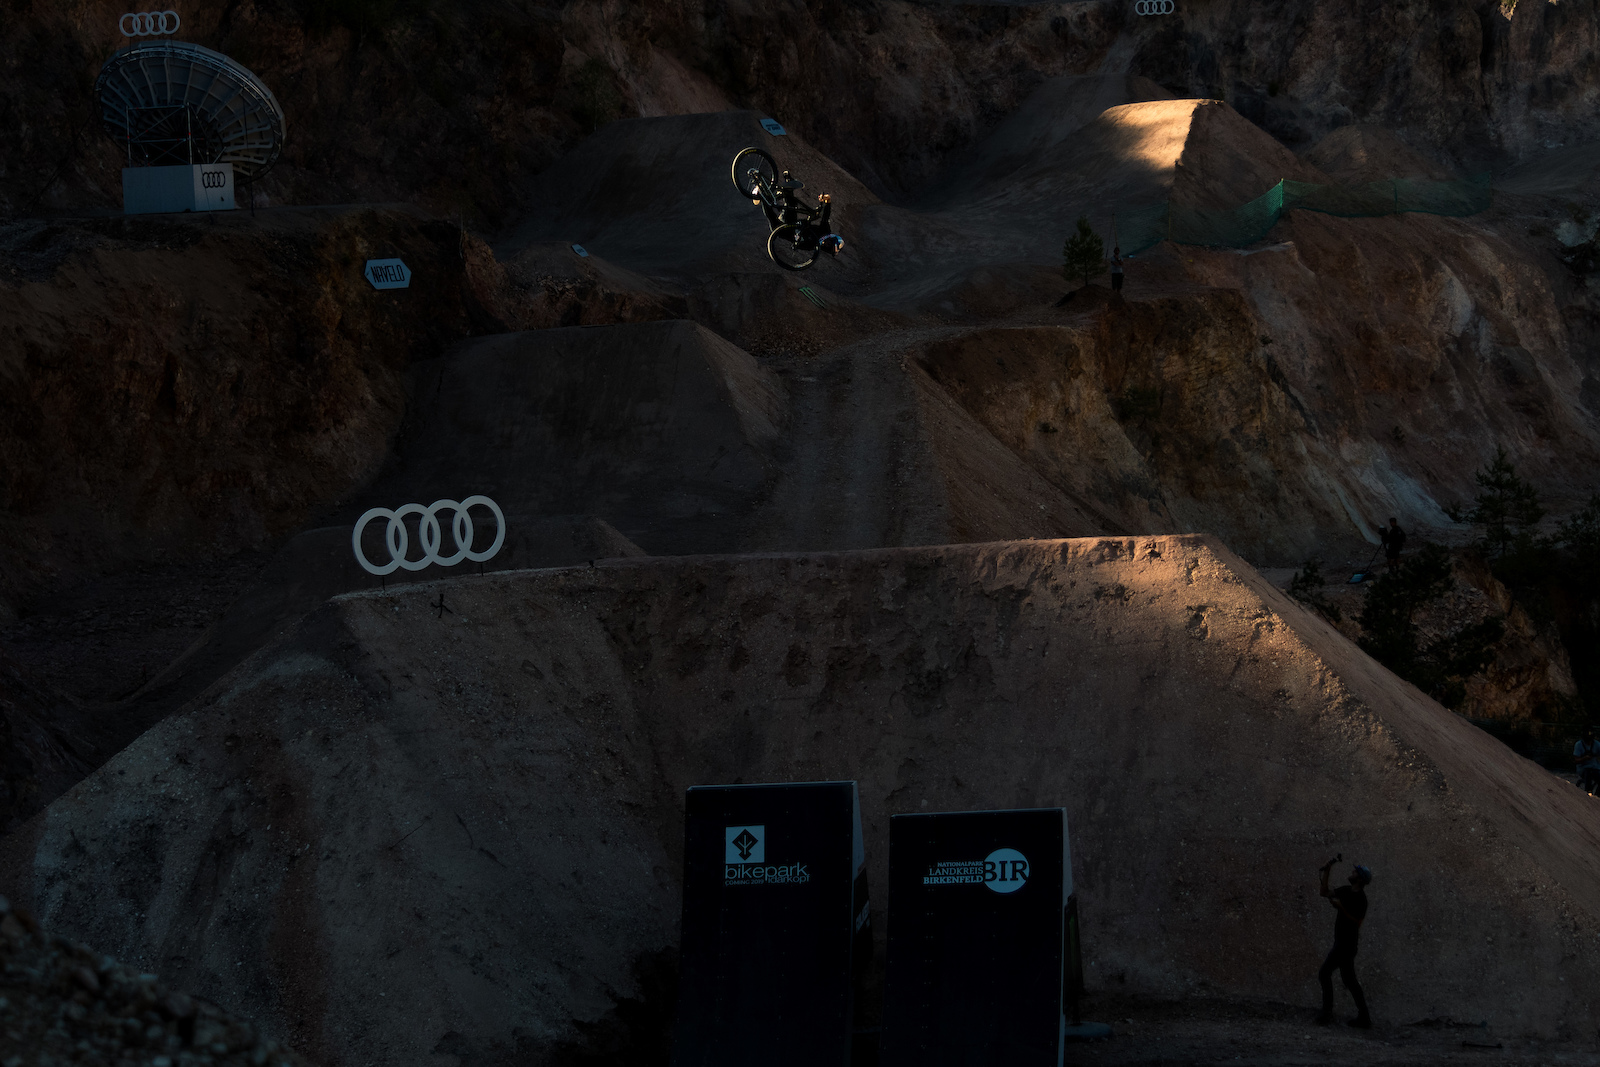 2018 is all about shoulder buzzers for me and this "last light" shot from the Audi Nines's quarry is a perfect example of it. Emil is a workhorse with a beautiful soul and to spice this one for you - its actually a frame from a flip whip to late shoulder buzzer combo!